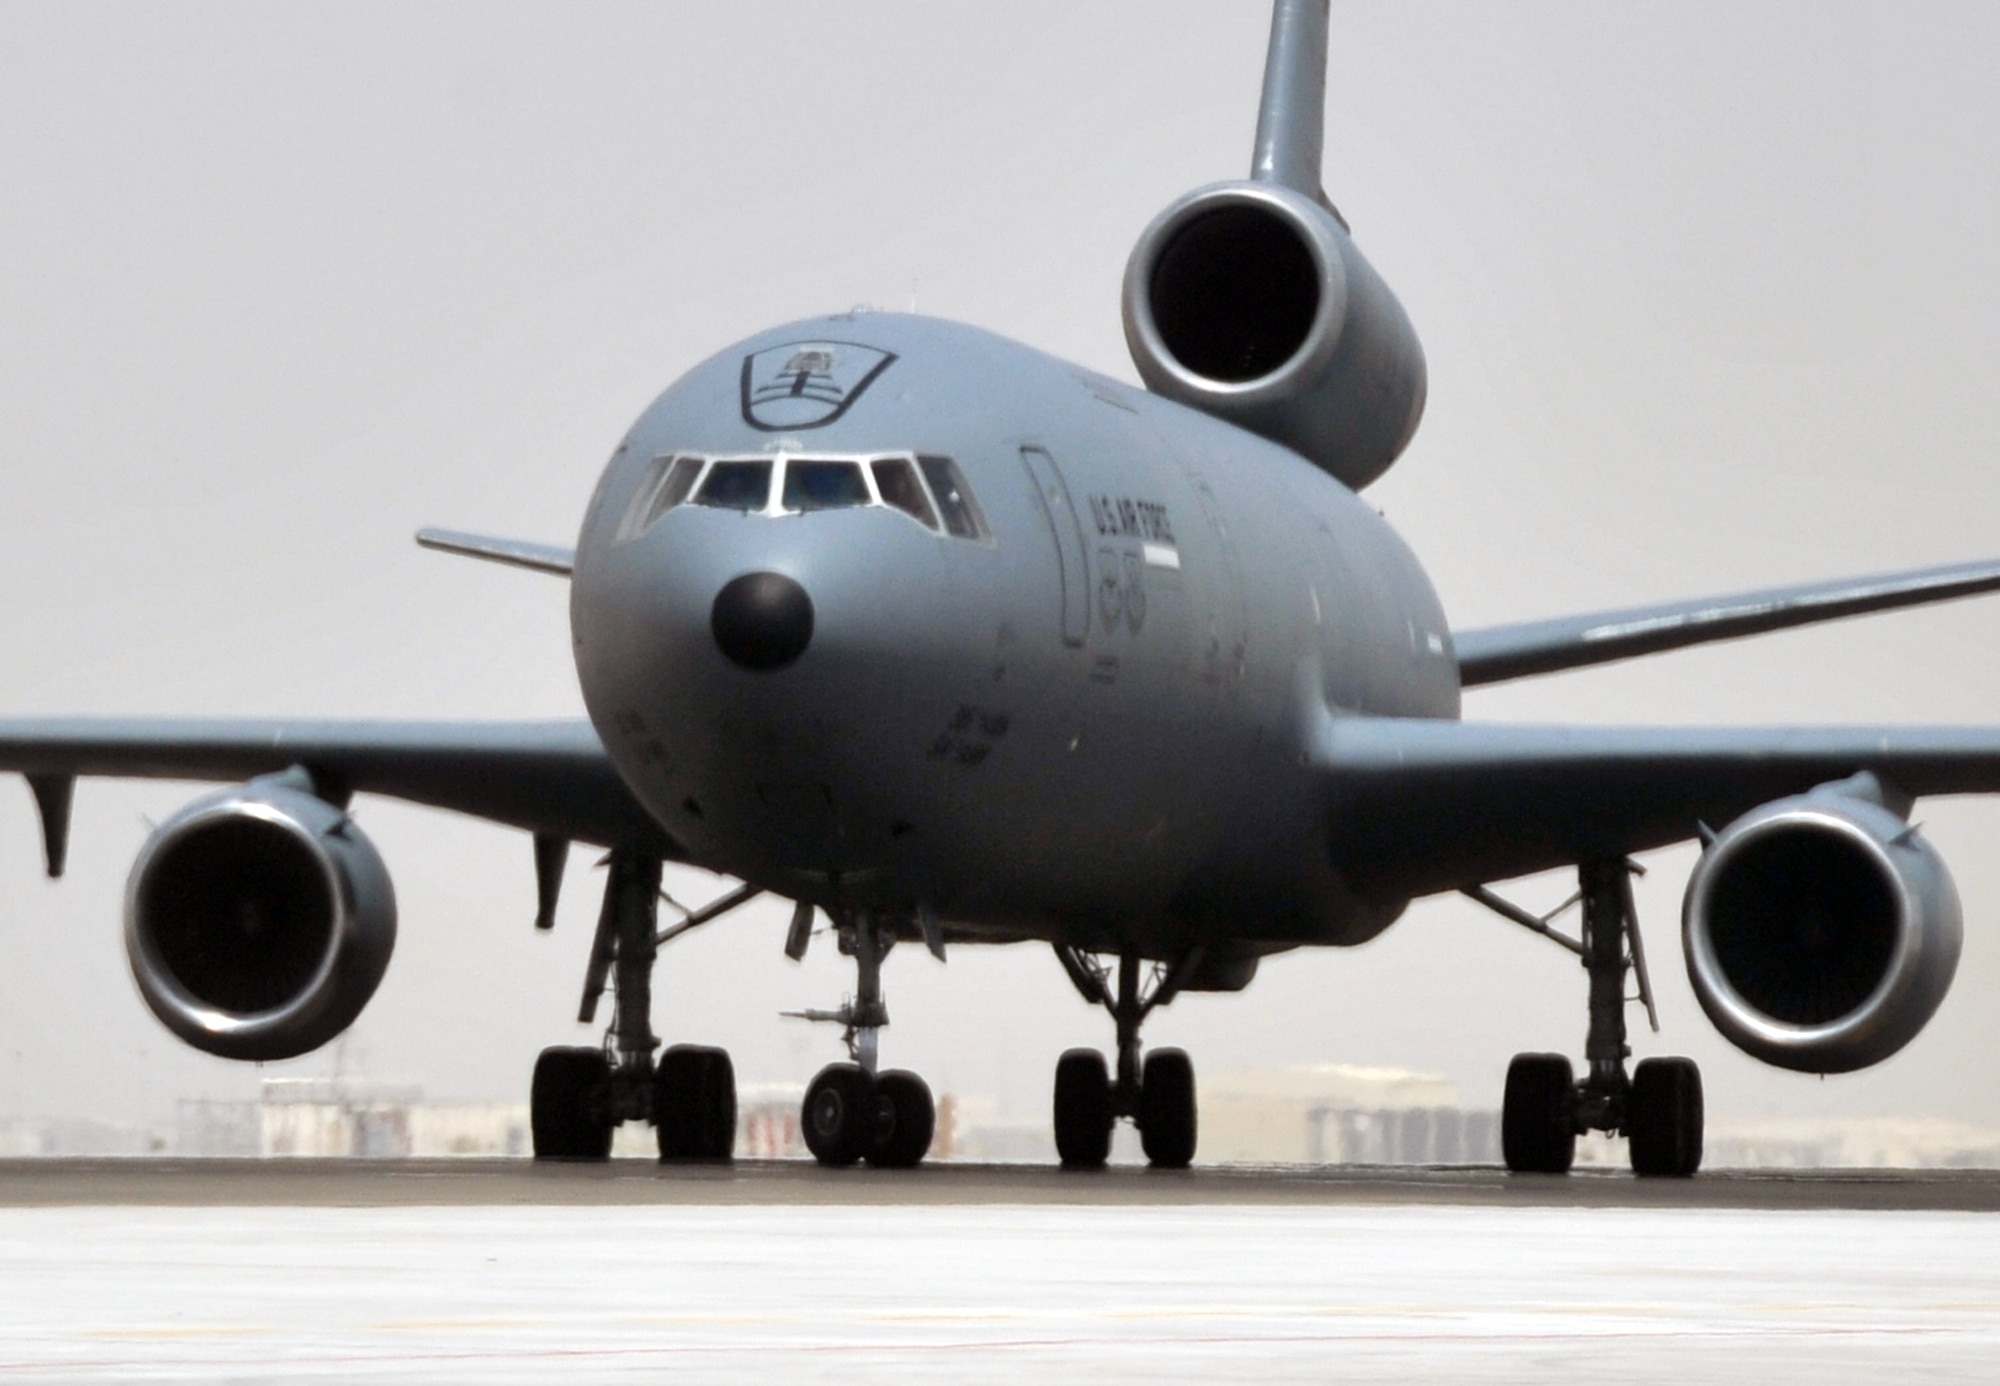 An aircrew from the 908th Expeditionary Air Refueling Squadron steers a KC-10 Extender down the taxiway of the flightline for the 380th Air Expeditionary Wing at a non-disclosed base in Southwest Asia on May 19, 2010. According to the 380th AEW history office, In the first three months of 2010, Airmen supporting the KC-10 deployed air refueling mission in the U.S. Central Command area of responsibility helped the KC-10 fly more than 1,000 sorties offl-loading more than 108 million pounds of fuel to more than 6,600 aircraft in support of combat operations. KC-10s and the Airmen who support them are deployed from the 305th Air Mobility Wing at Joint Base McGuire-Dix-Lakehurst, N.J., and the 60th Air Mobility Wing at Travis Air Force Base, Calif. (U.S. Air Force Photo/Master Sgt. Scott T. Sturkol/Released)